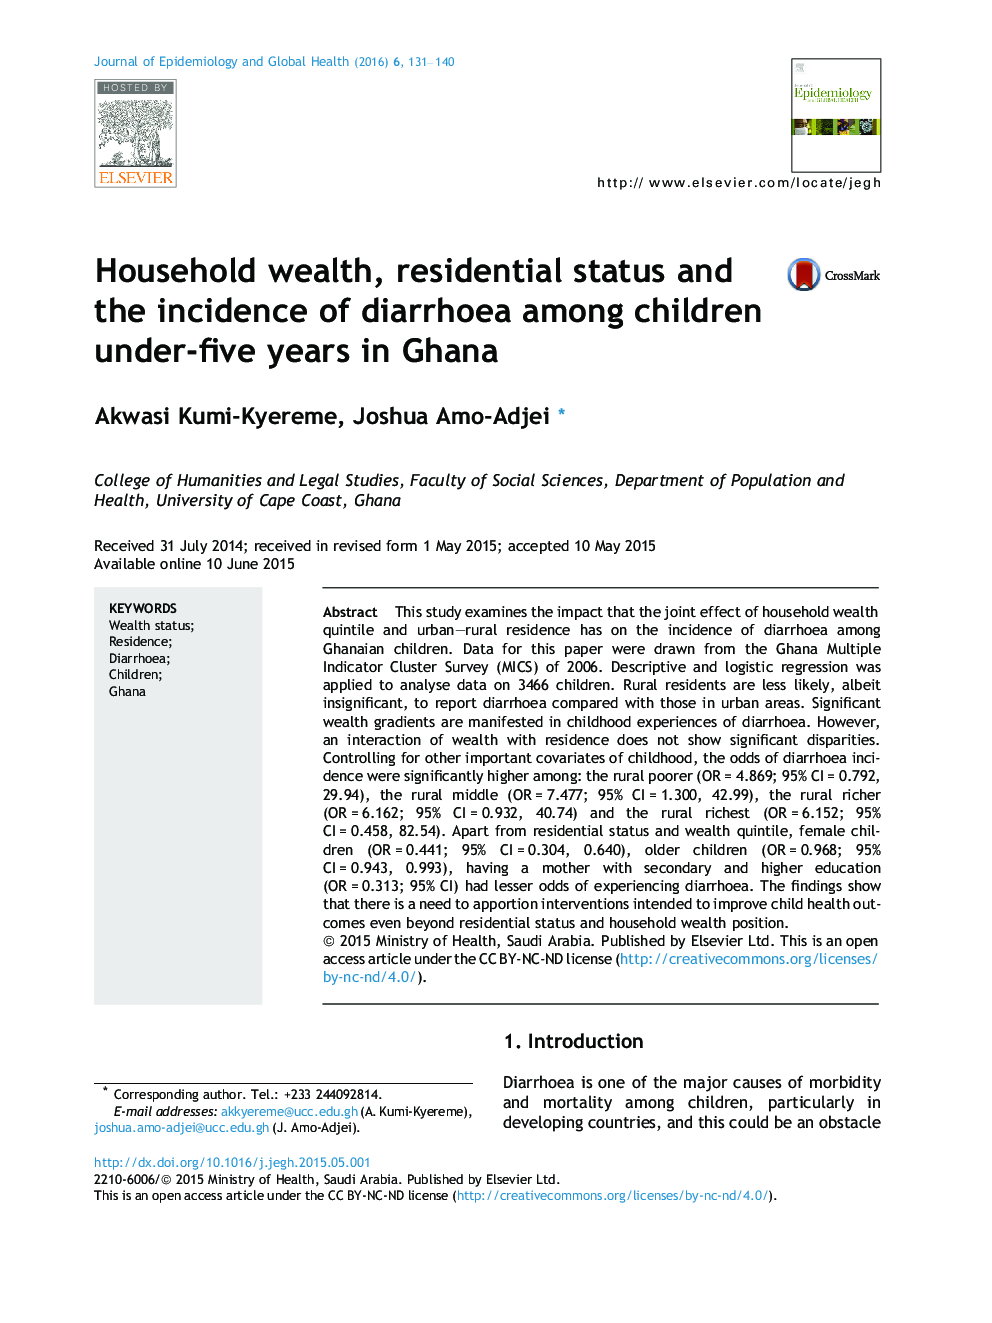 Household wealth, residential status and the incidence of diarrhoea among children under-five years in Ghana